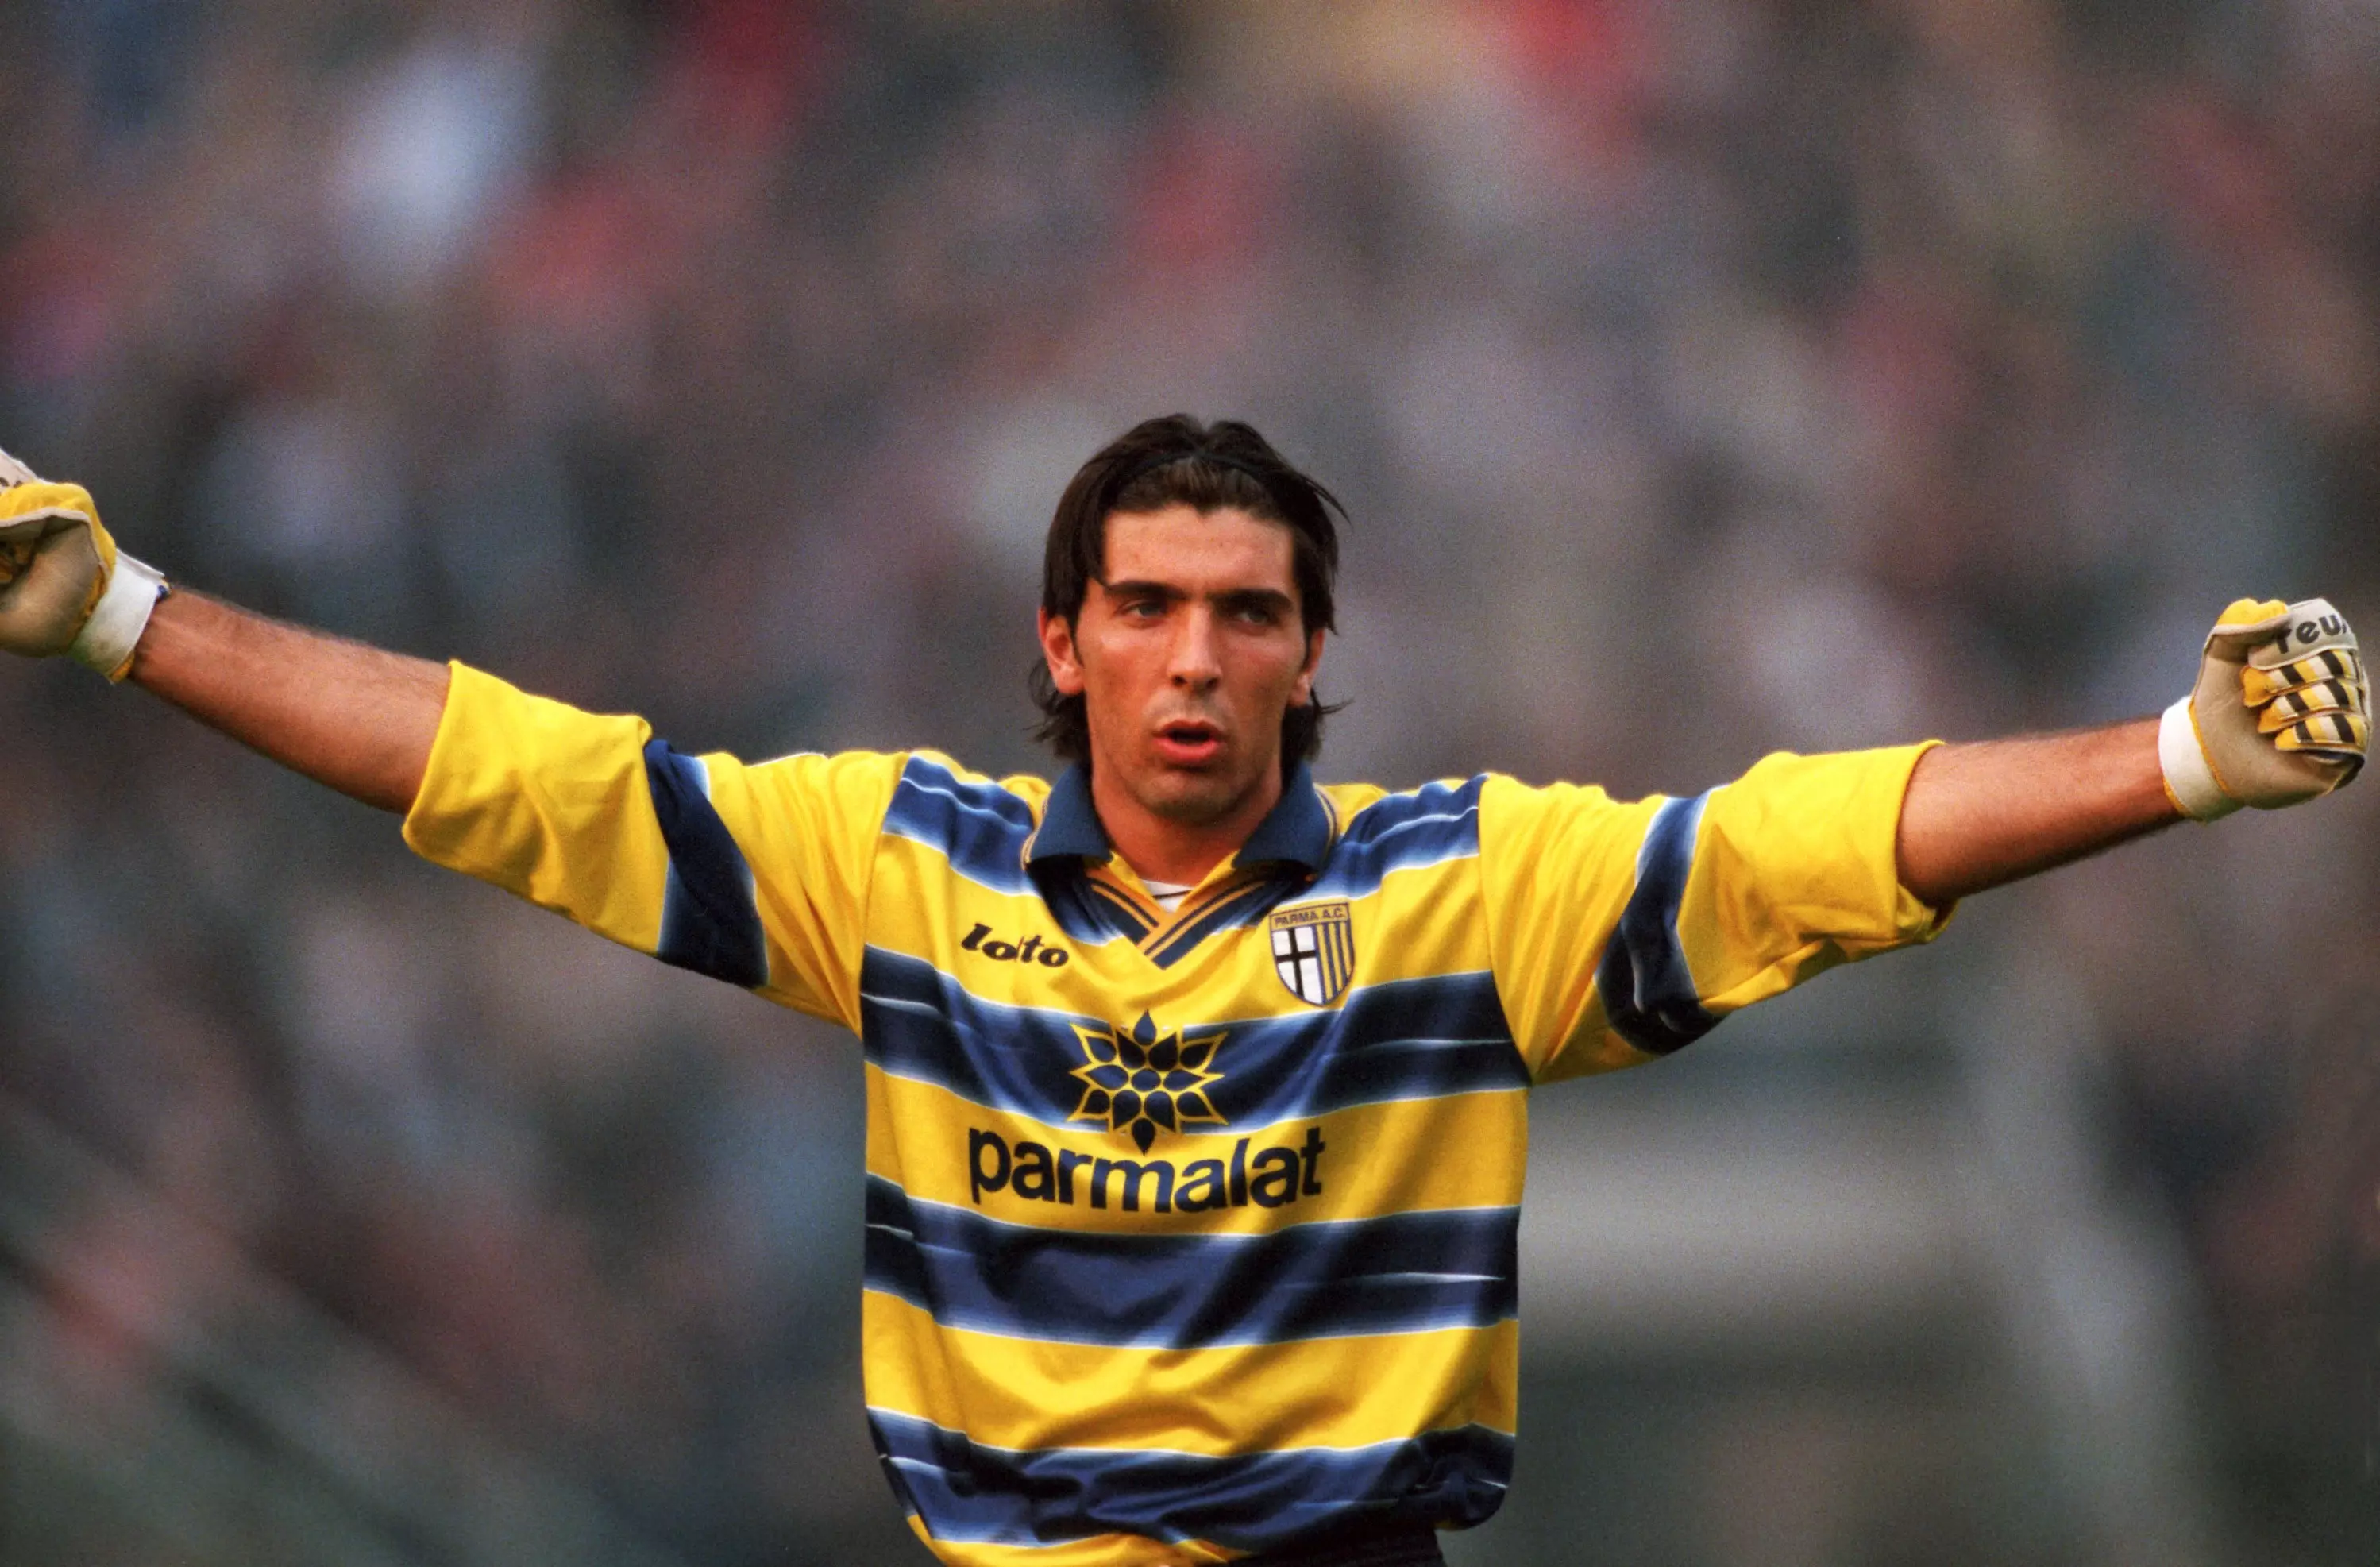 Buffon playing for Parma back in 1998 (Image